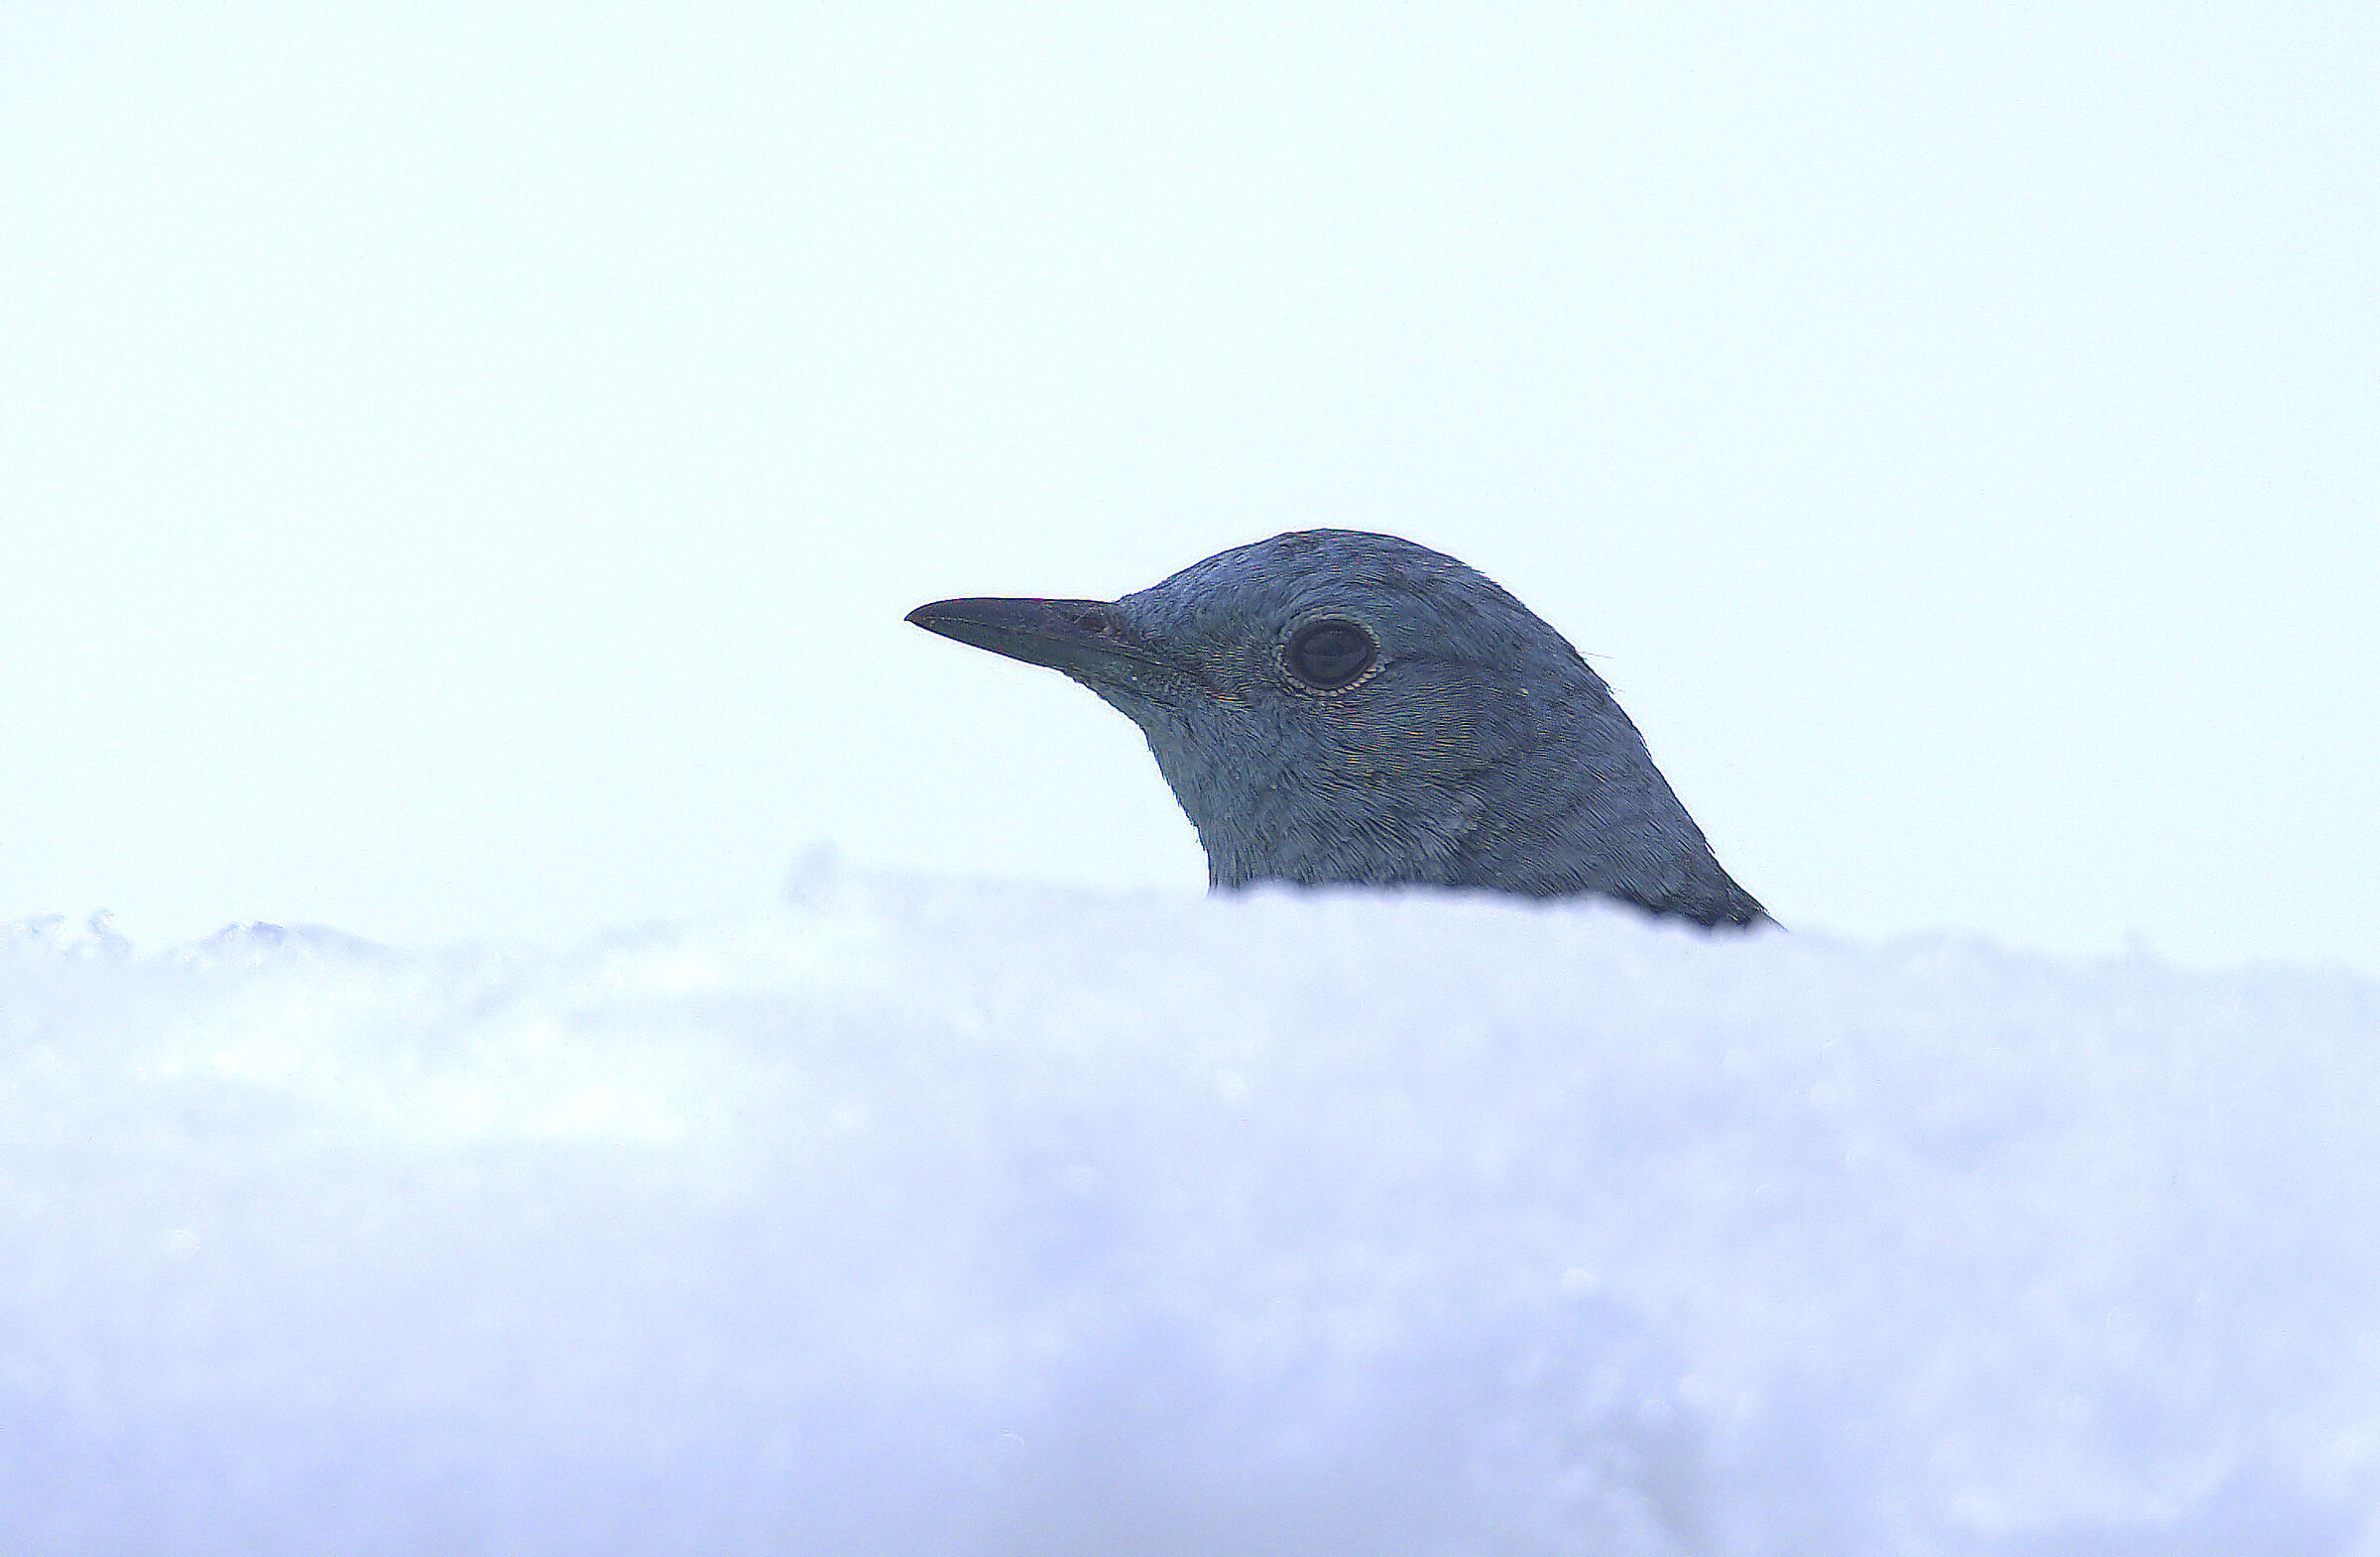 Male thrush peeking out in the snow...